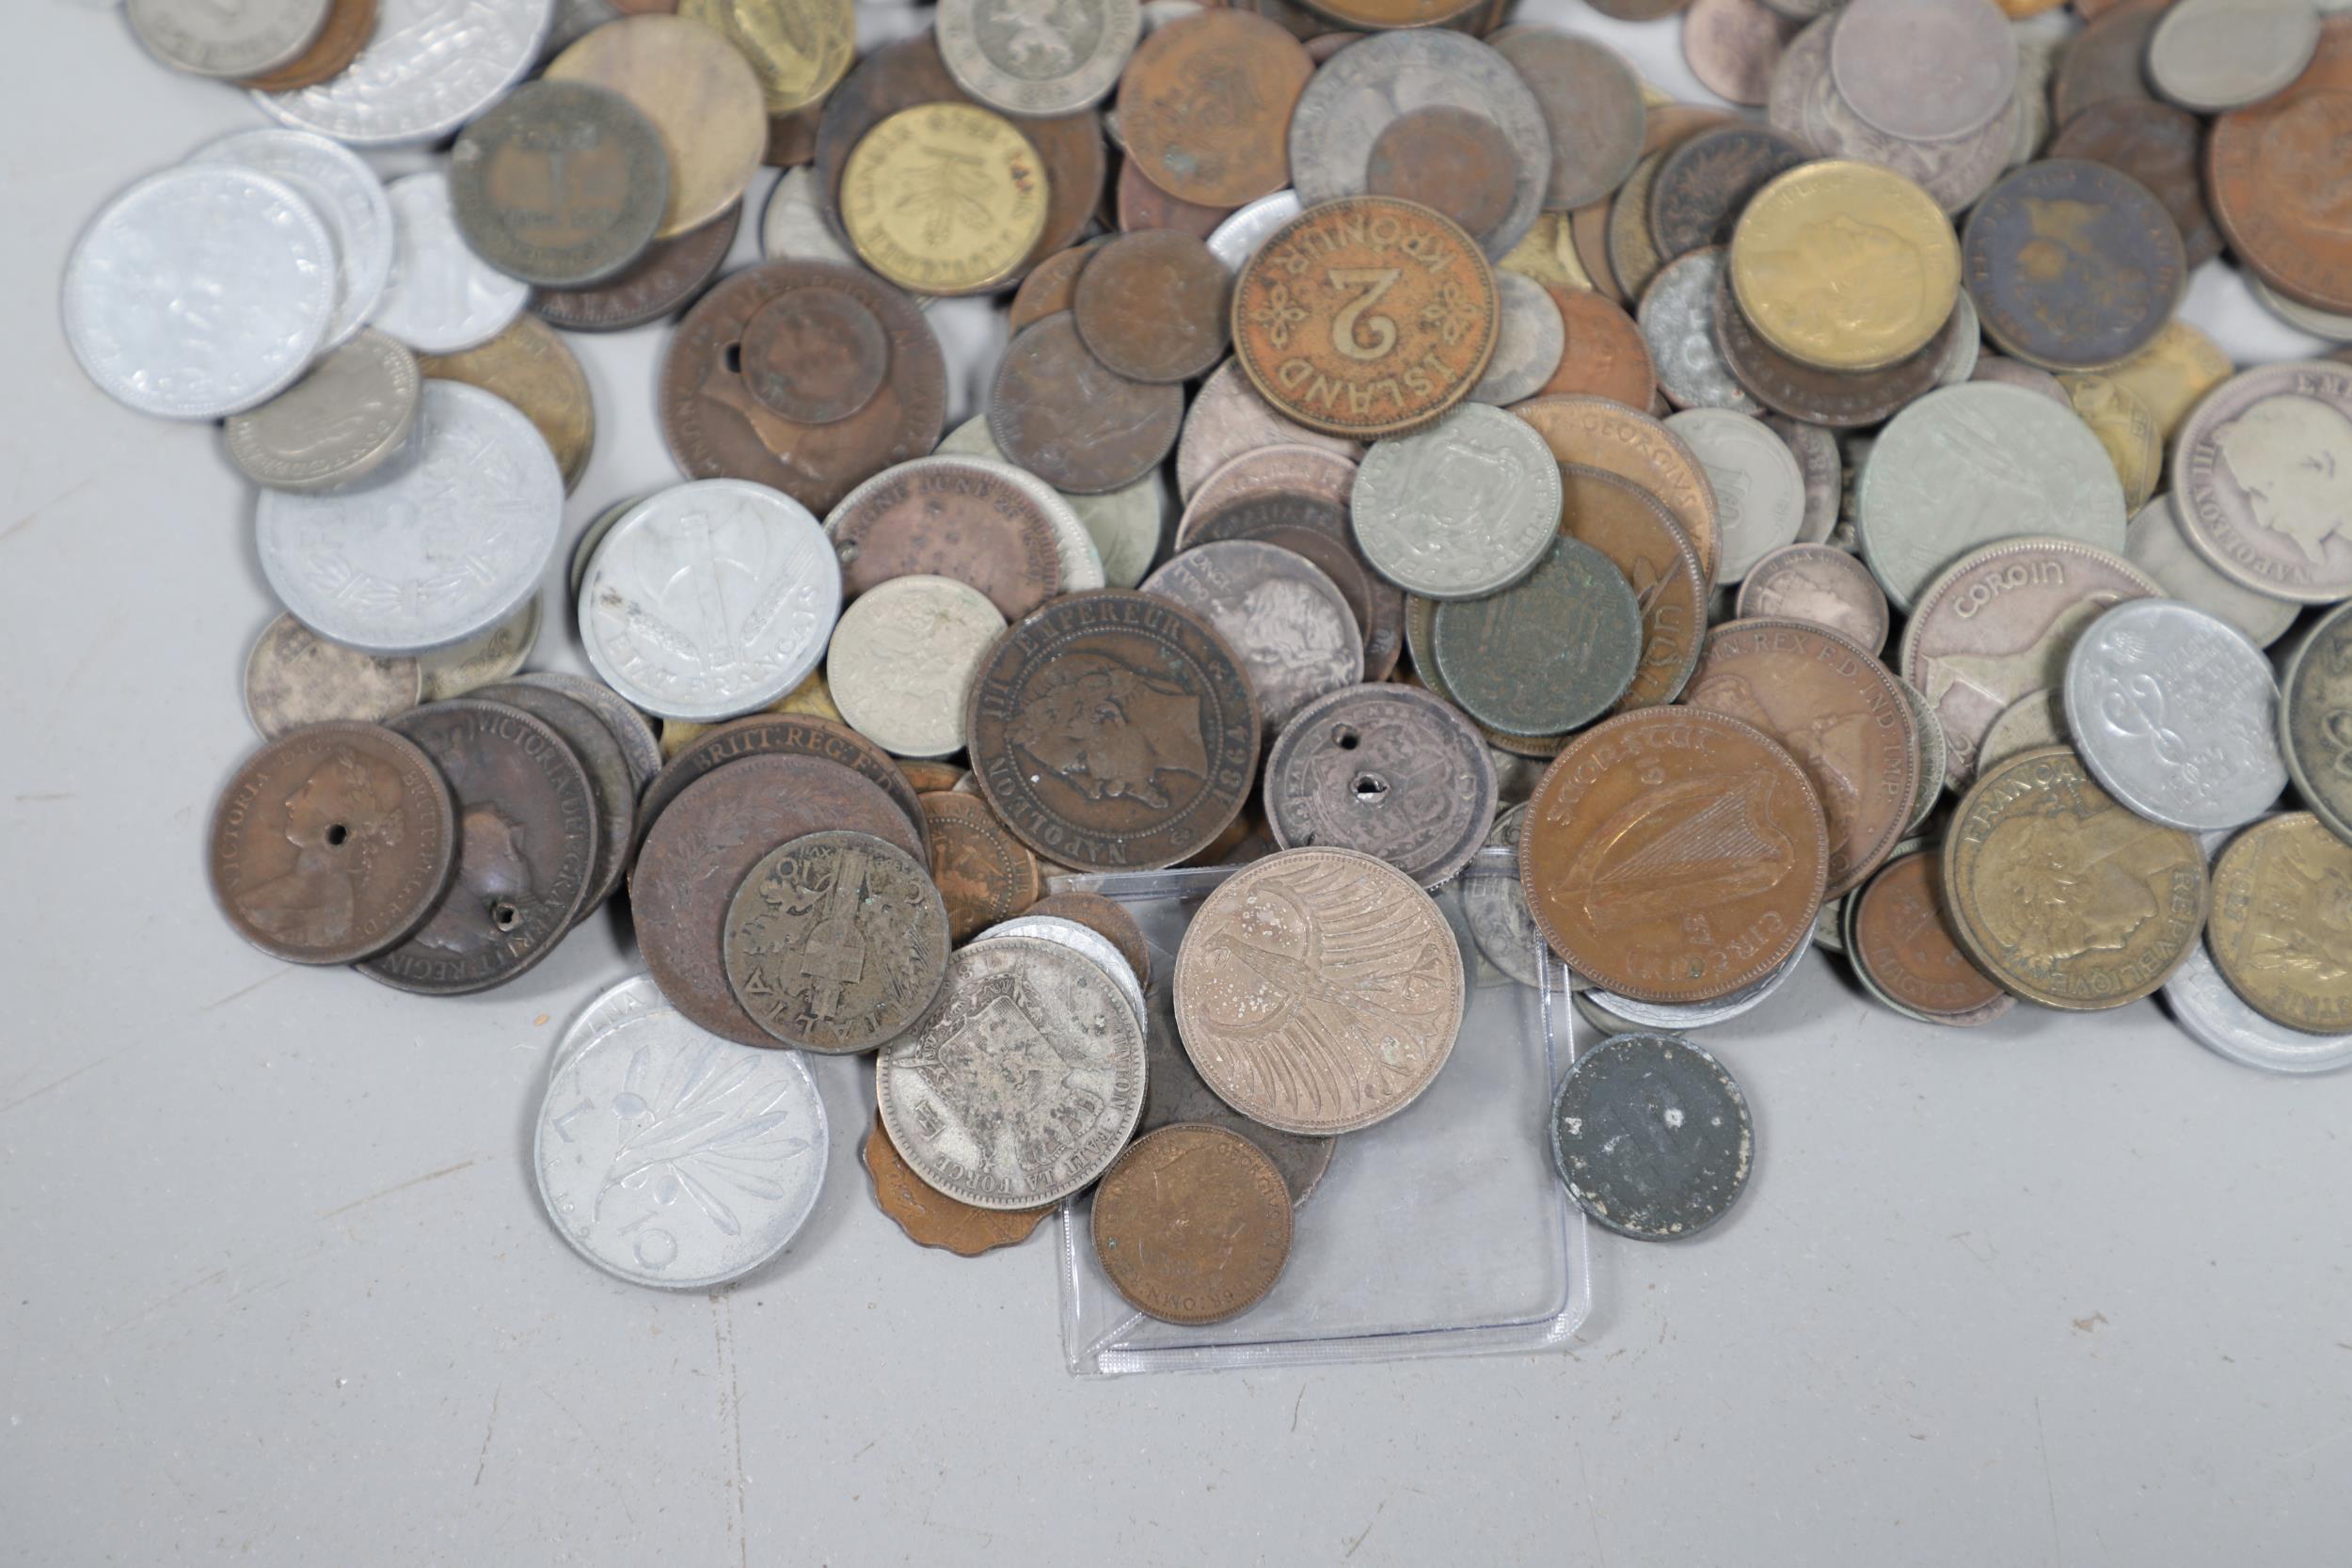 A LARGE COLLECTION OF WORLD COINS AND SIMILAR BRITISH COINS. - Image 13 of 20